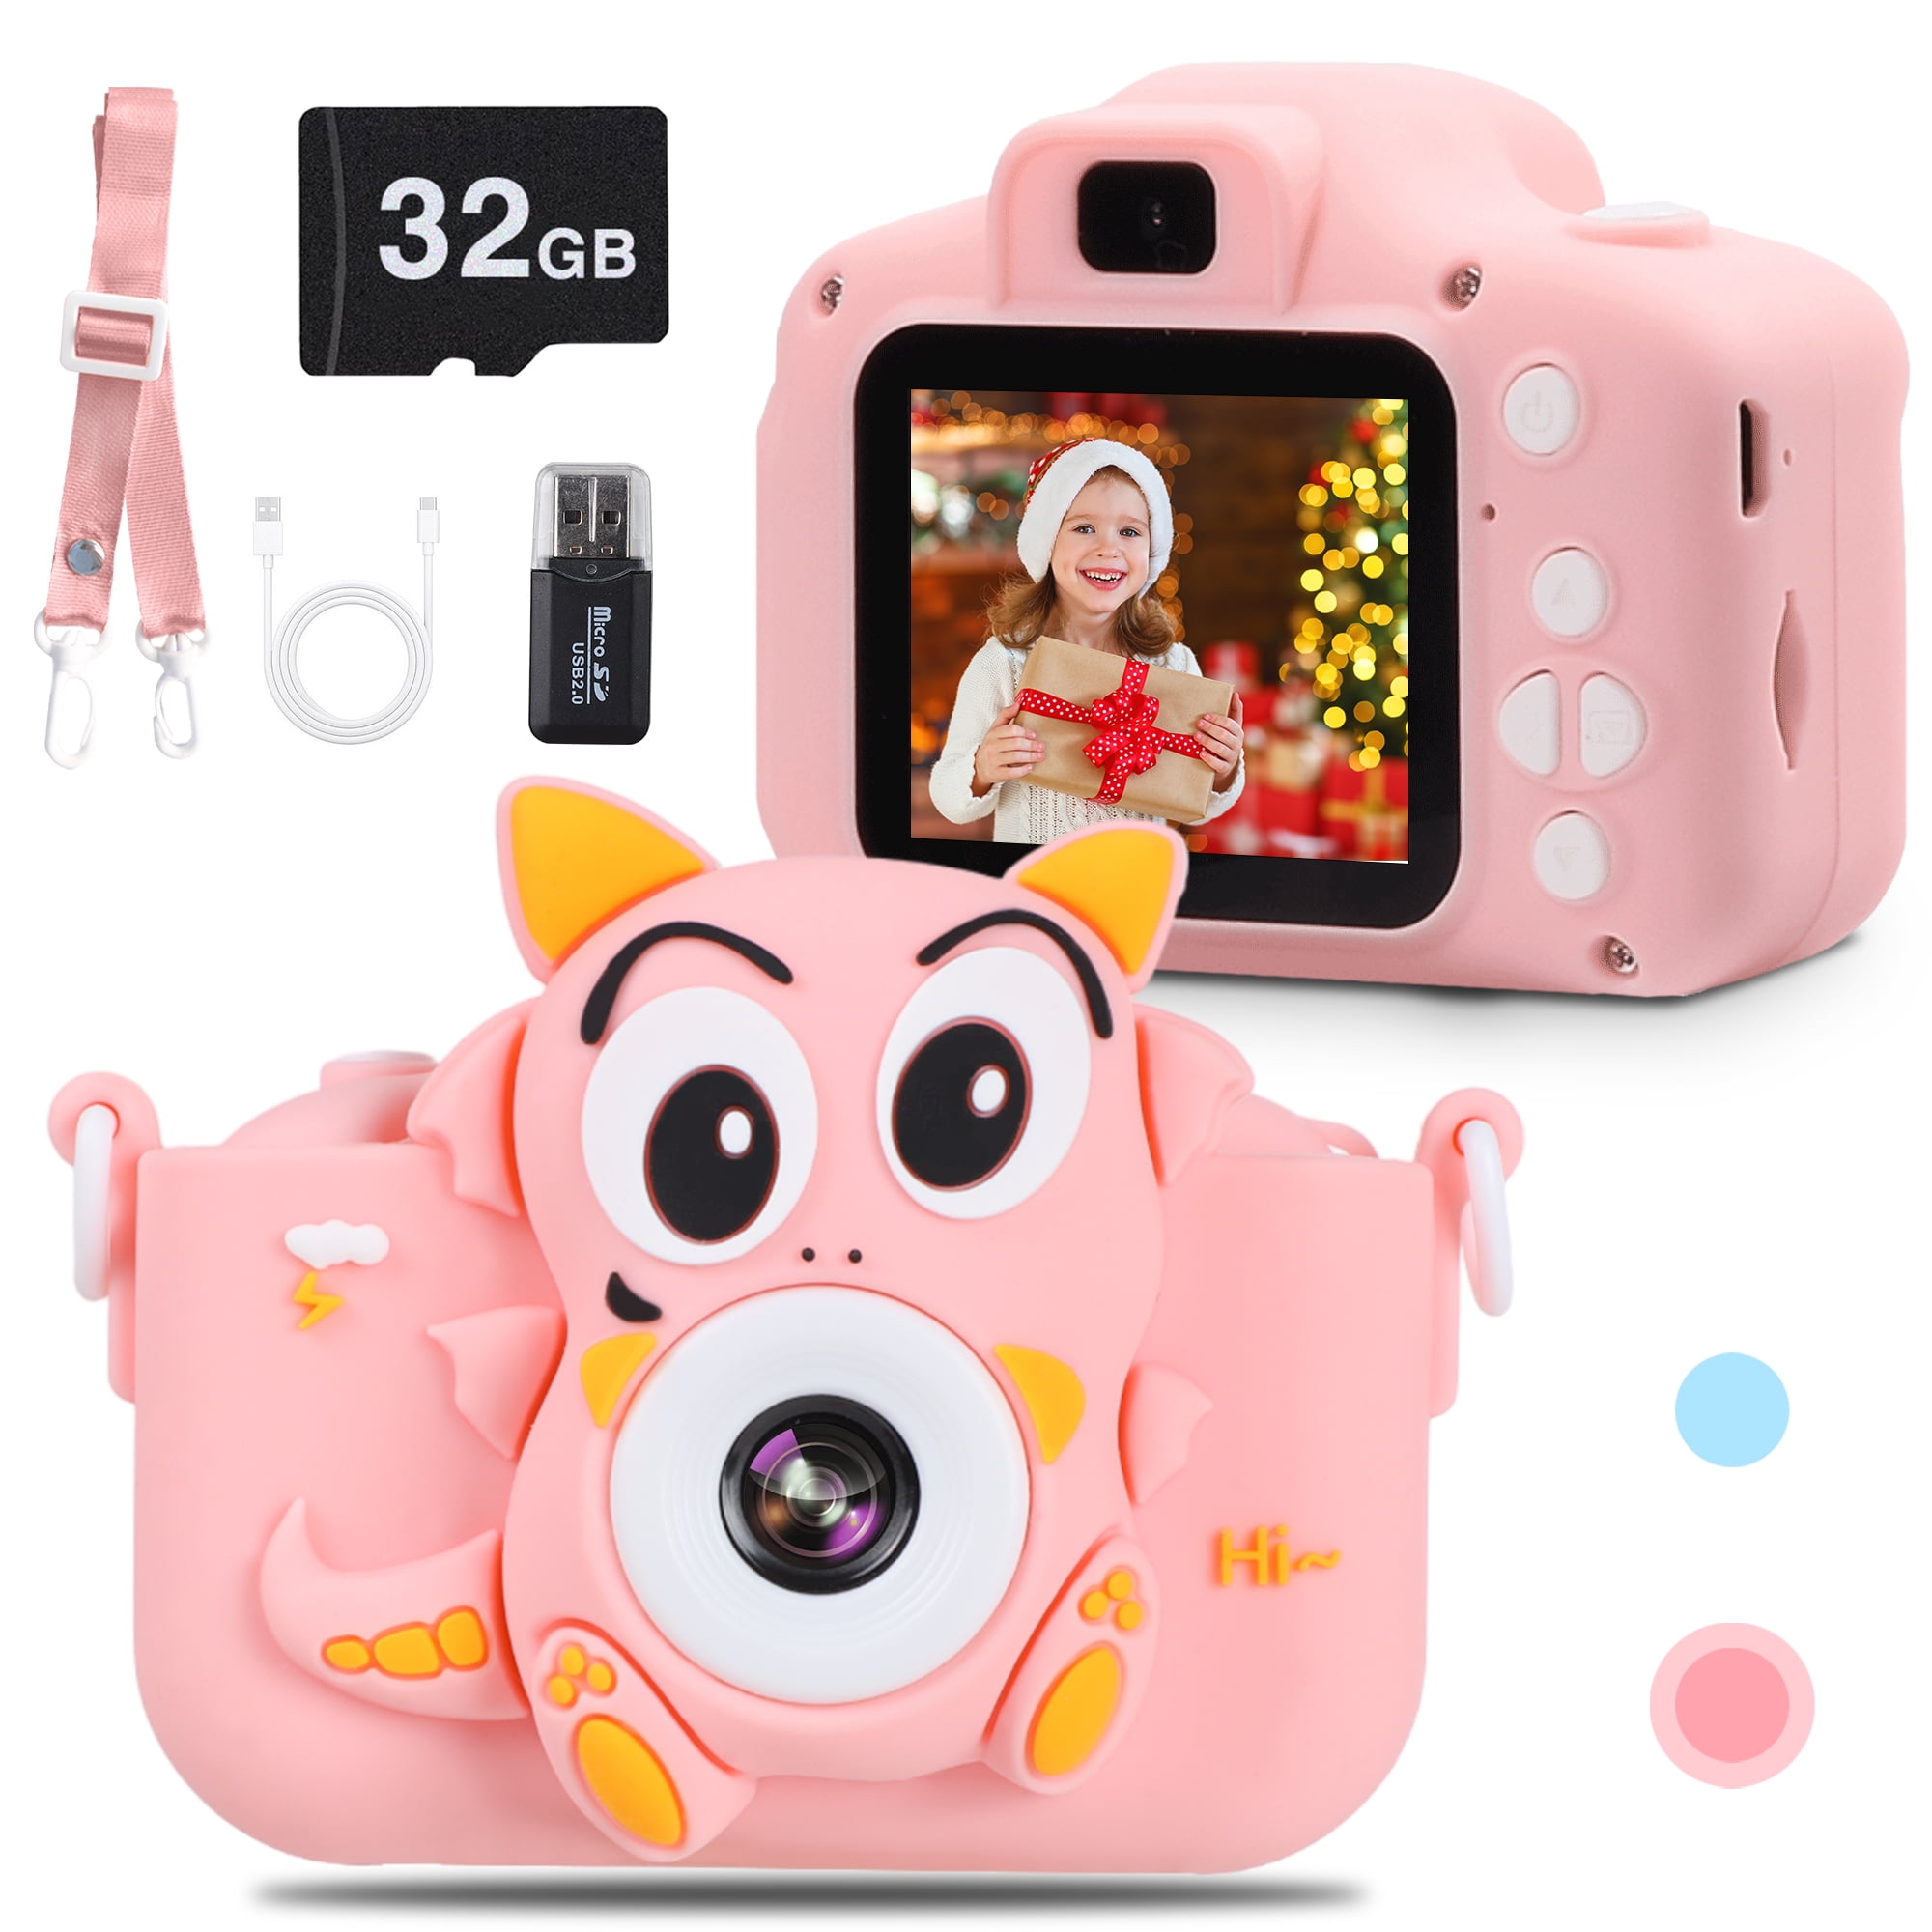 Unicorn Pink Digital Camera Toy for Girls 6-13 Years Old Kids